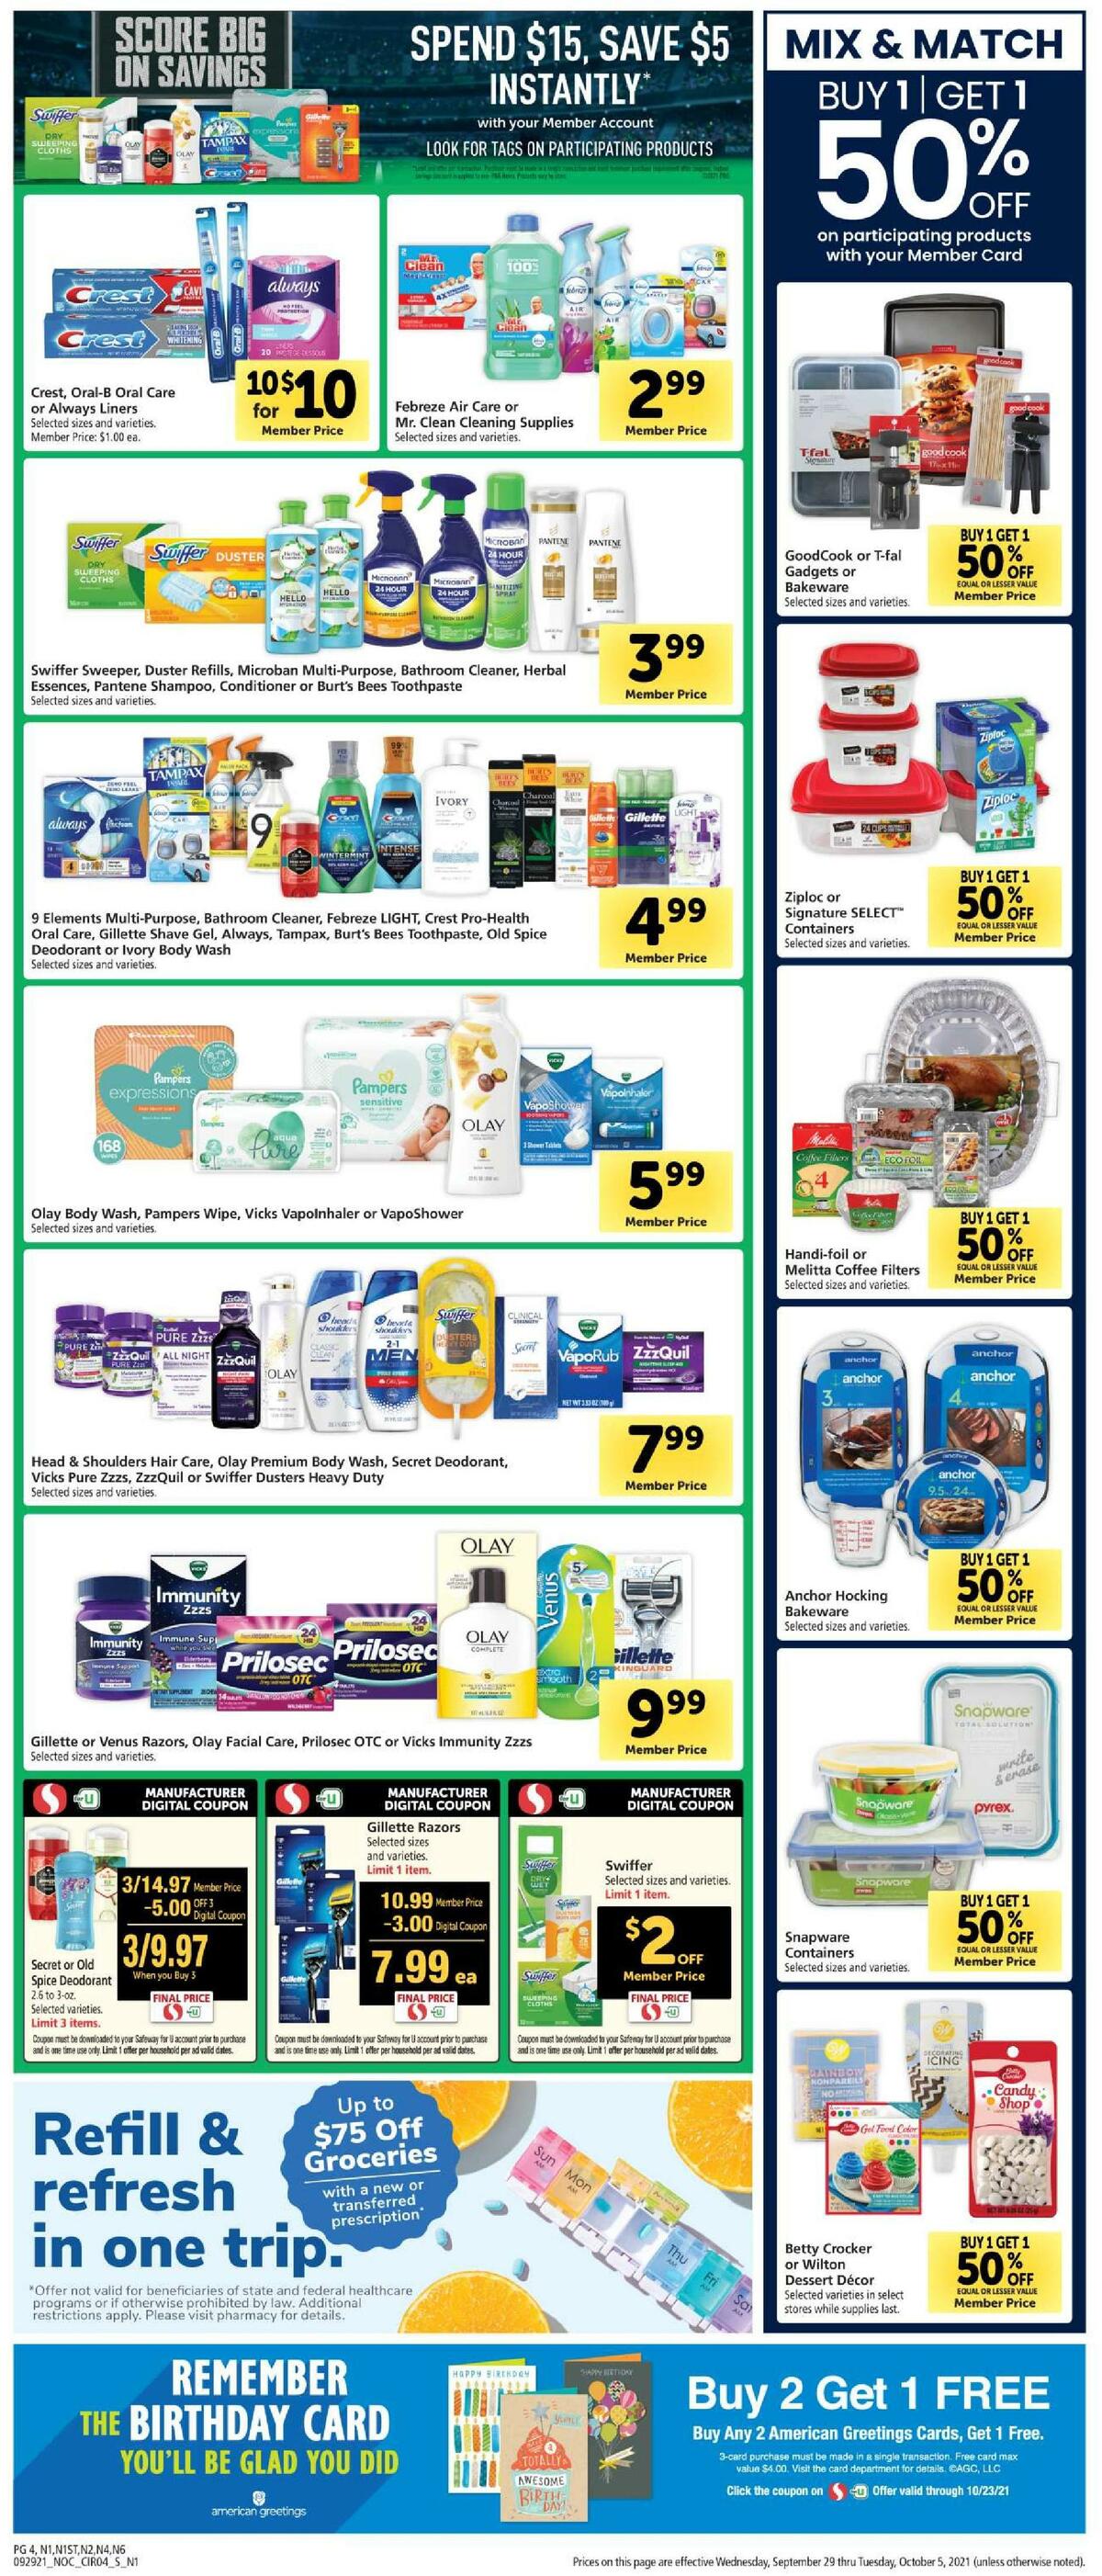 Safeway Weekly Ad from September 29